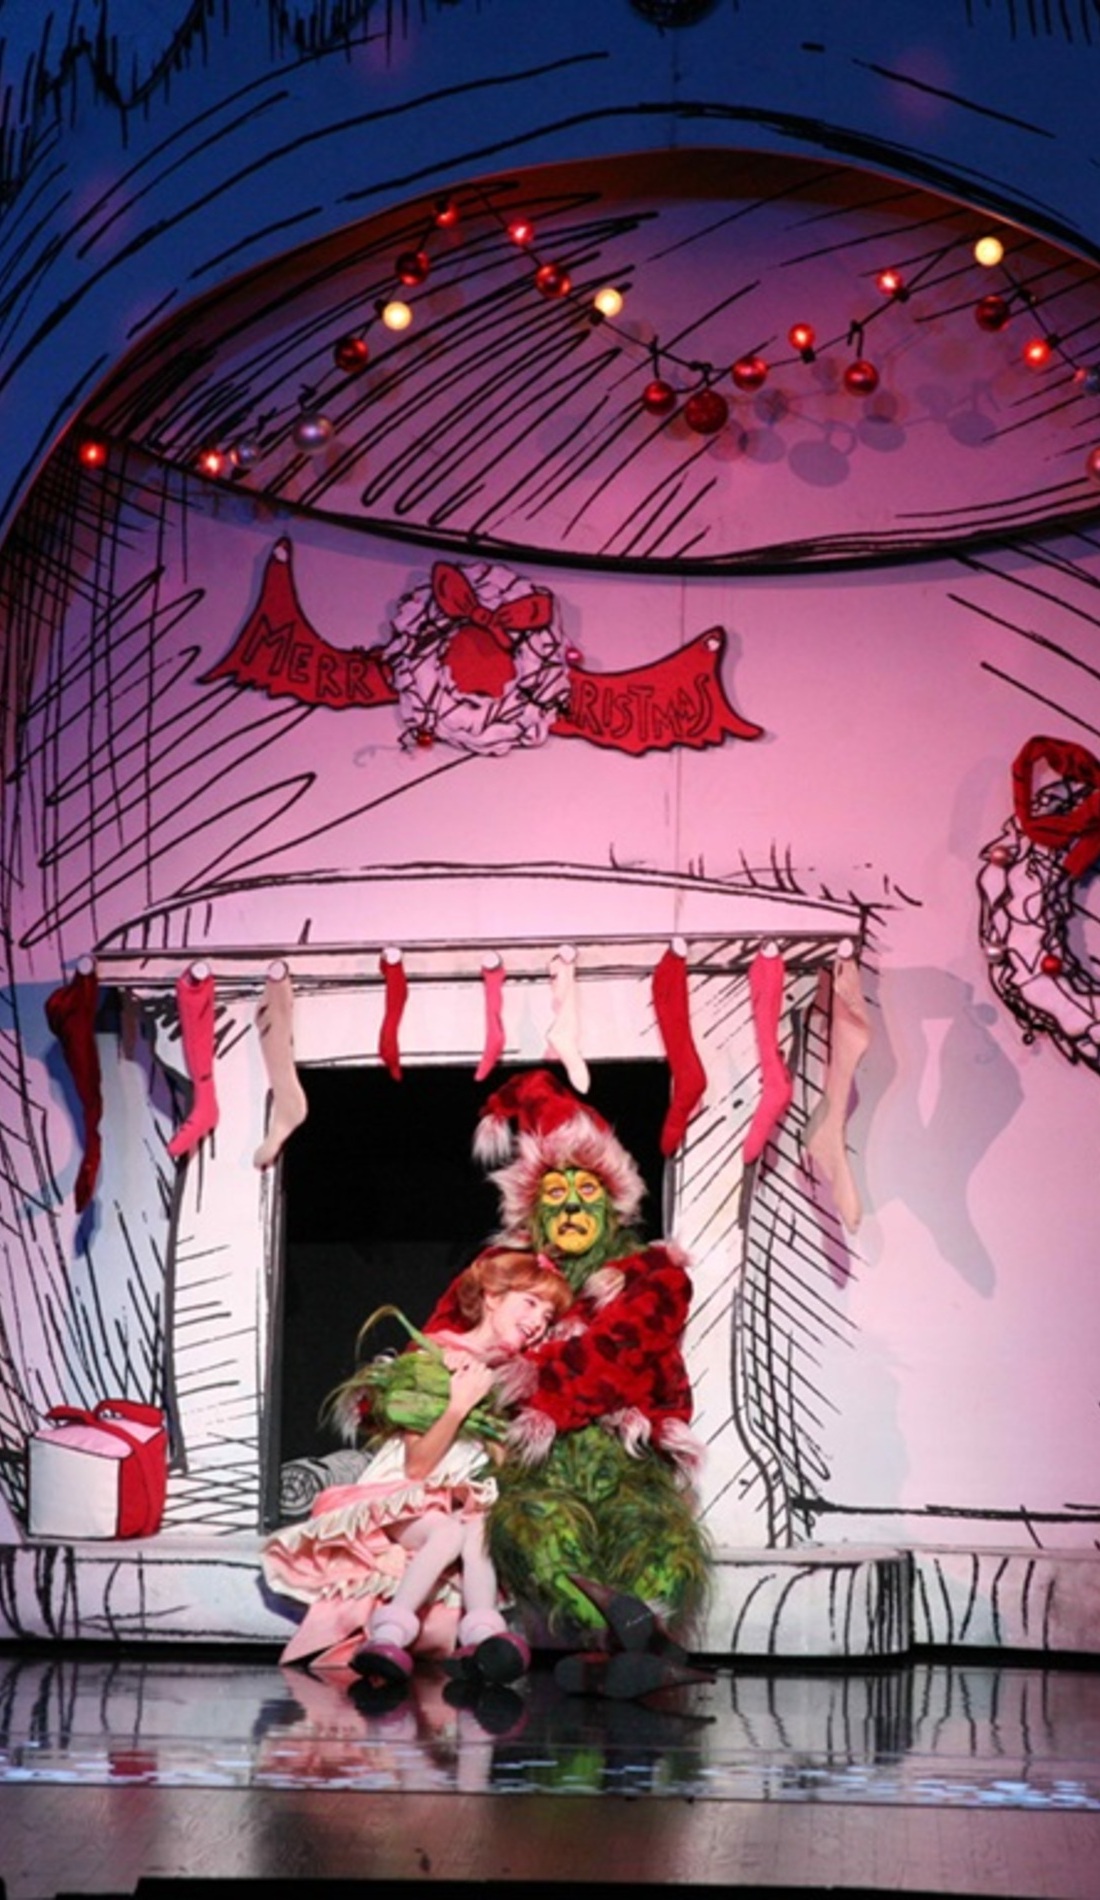 How The Grinch Stole Christmas Tickets | SeatGeek